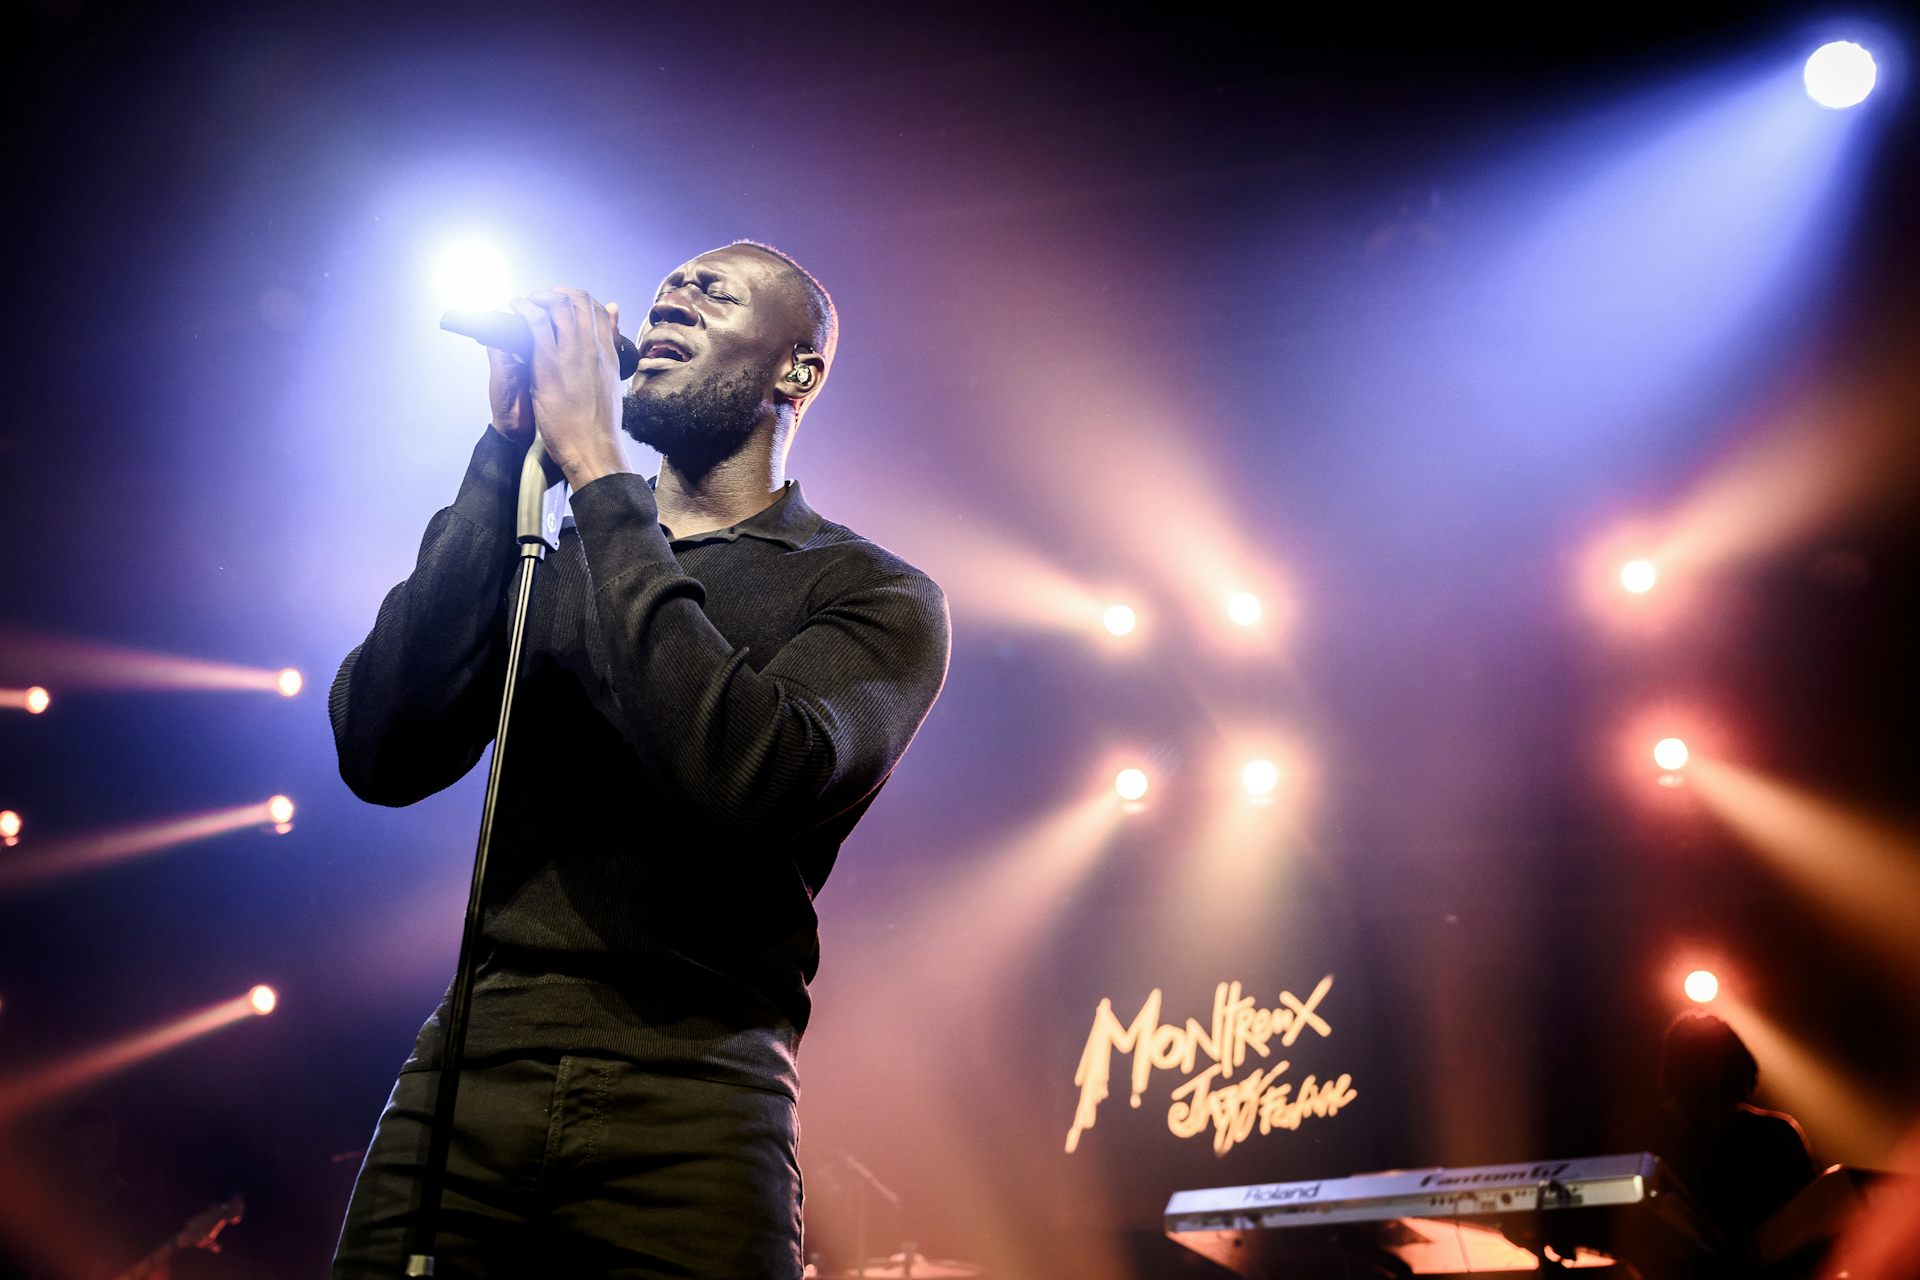 Stormzy: This Is What I Mean – spirituality takes centre stage on the artist